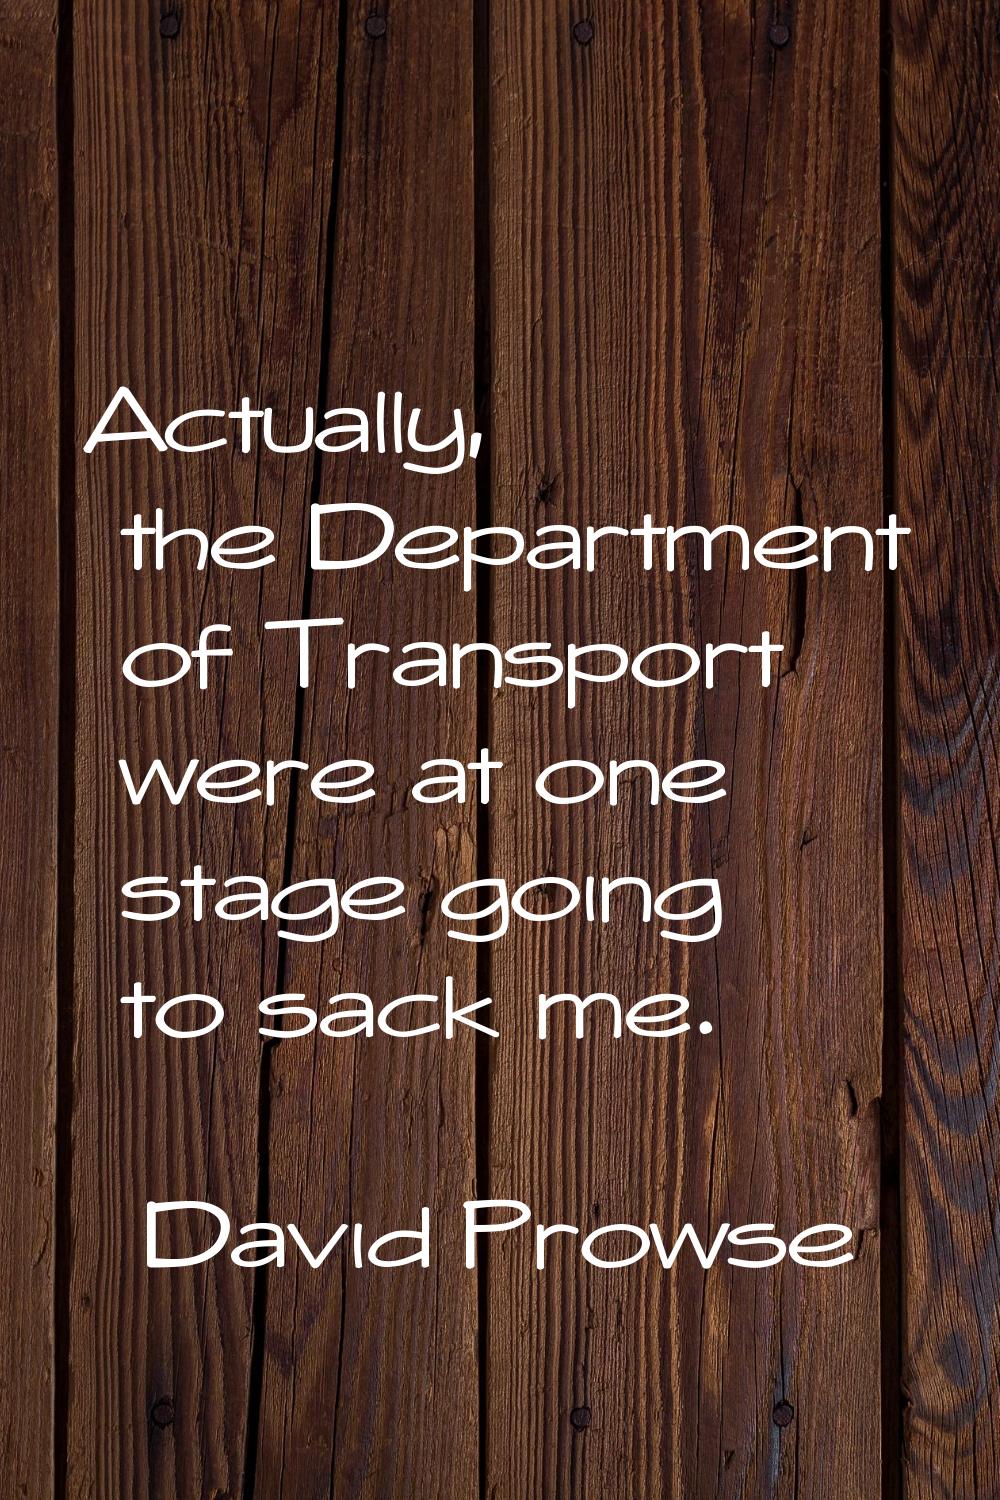 Actually, the Department of Transport were at one stage going to sack me.